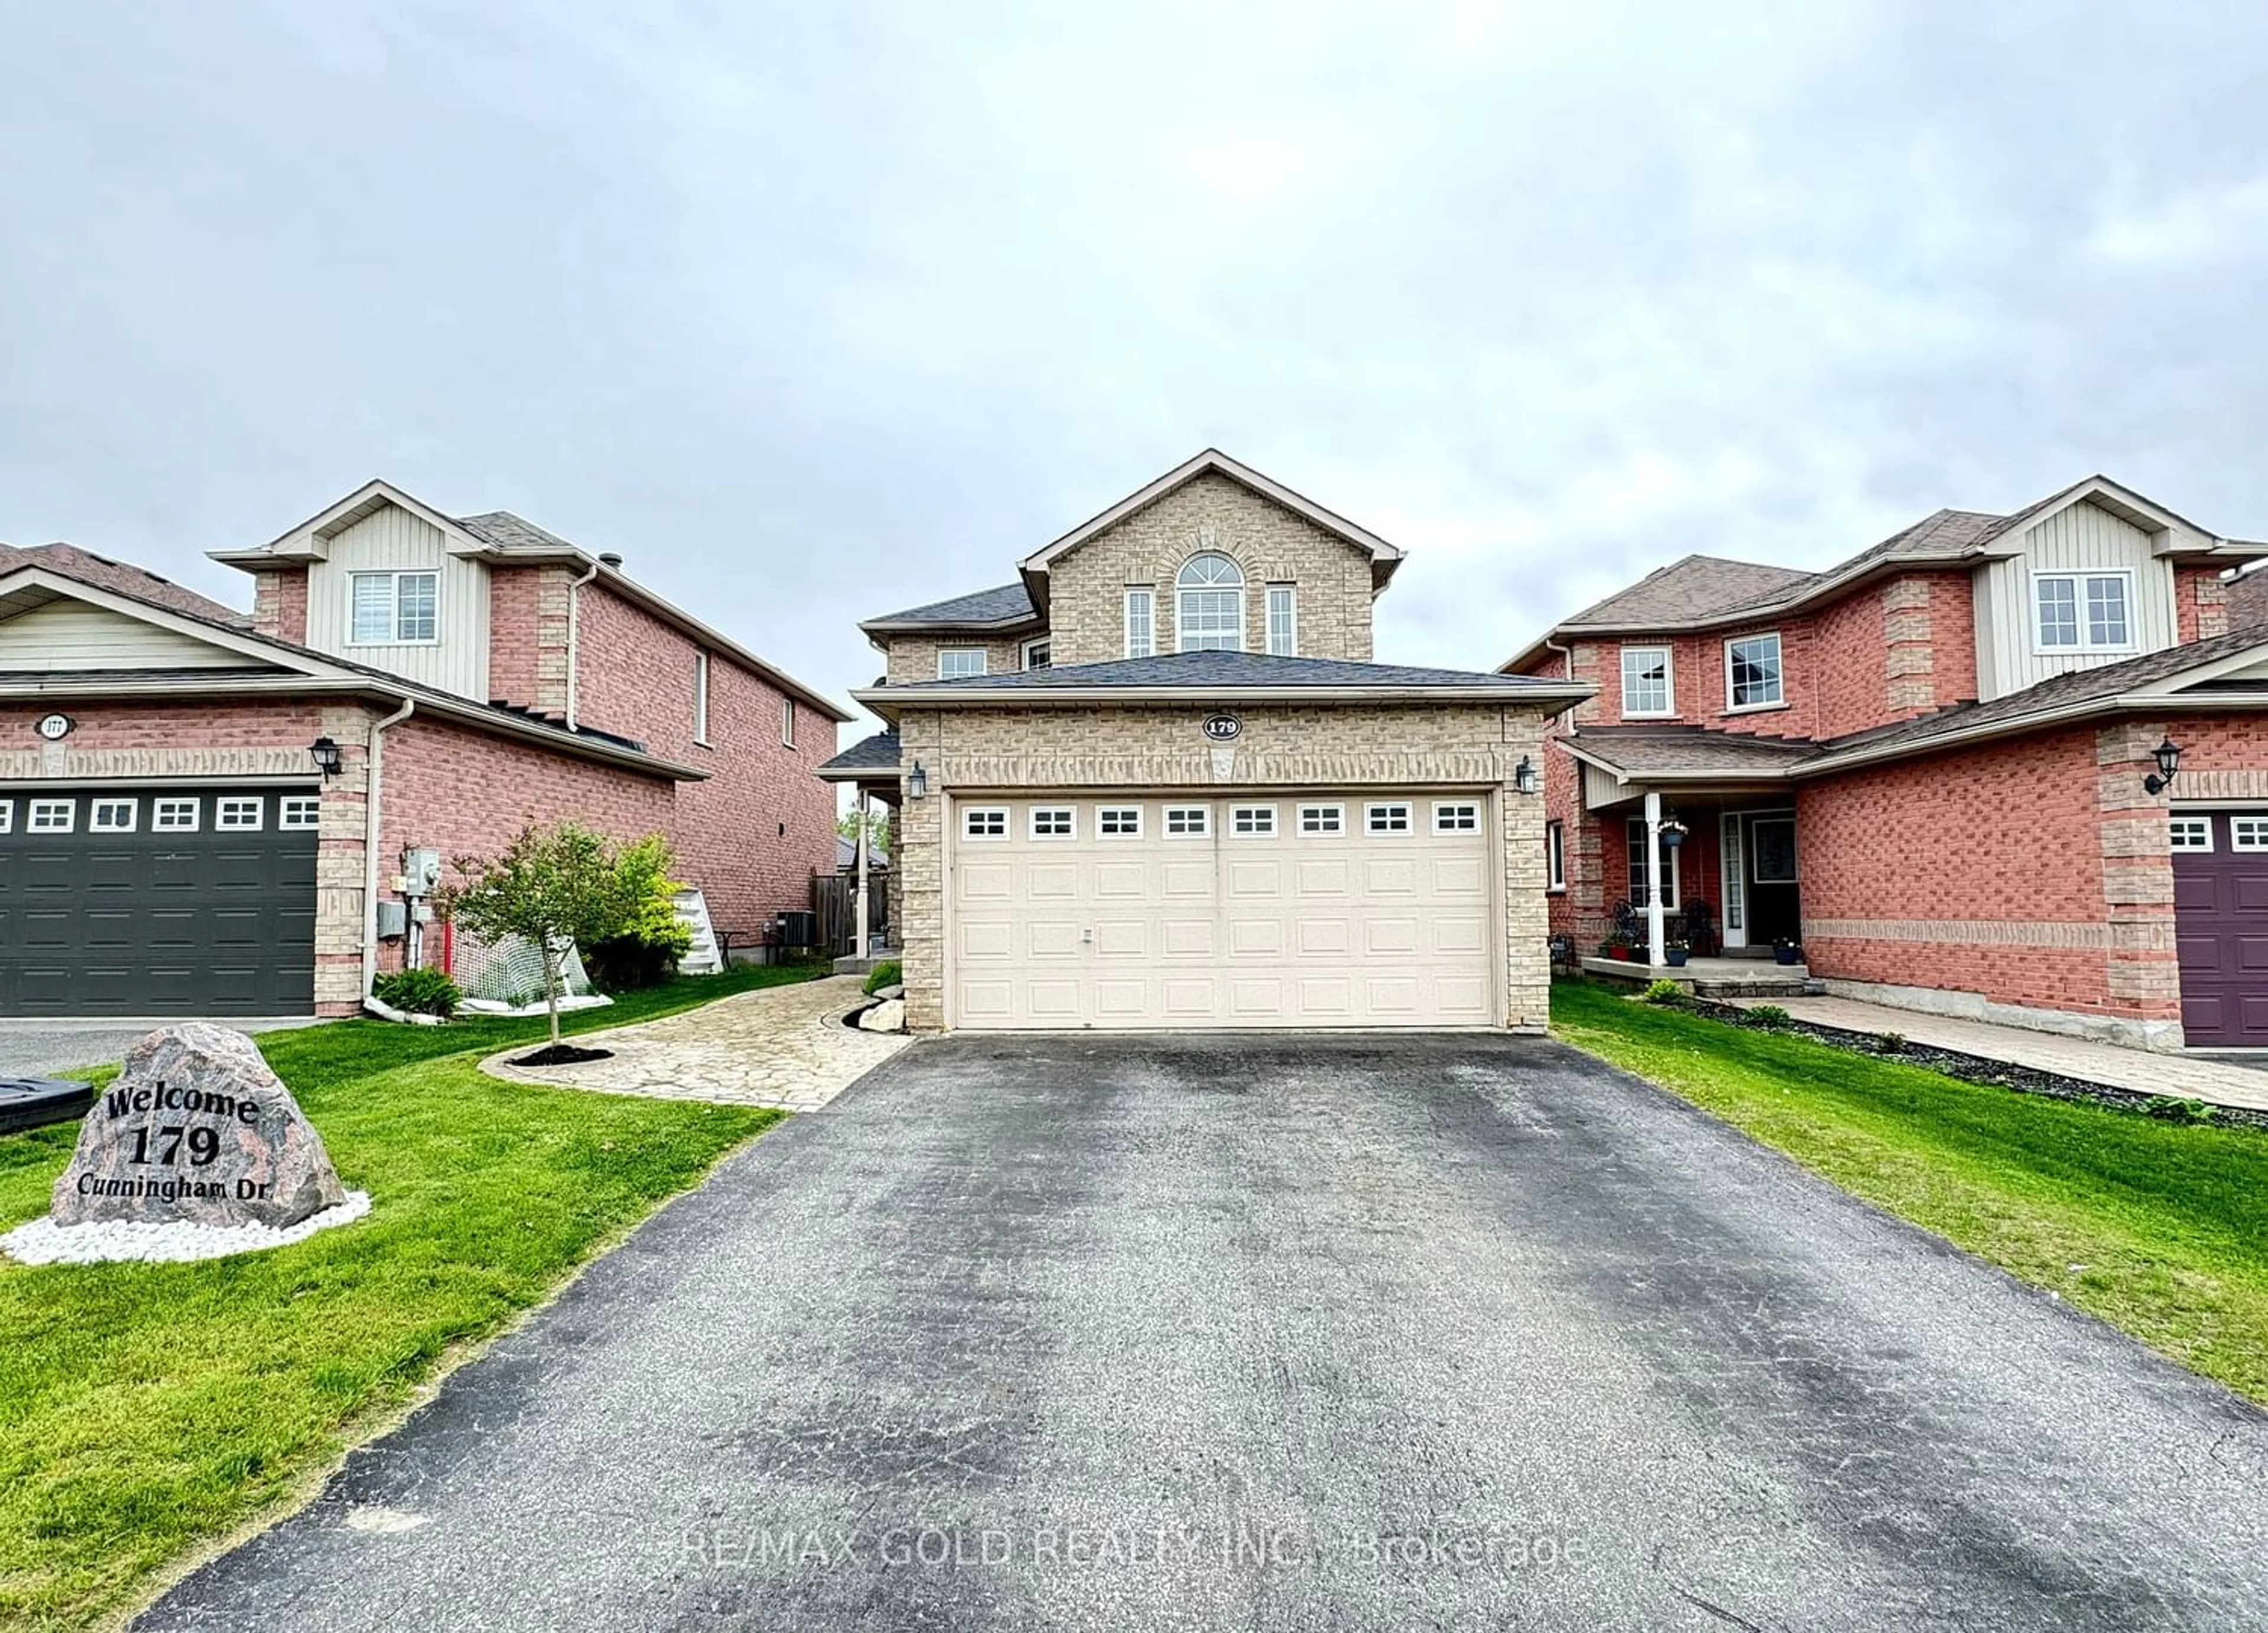 Frontside or backside of a home for 179 Cunningham Dr, Barrie Ontario L4N 5R2